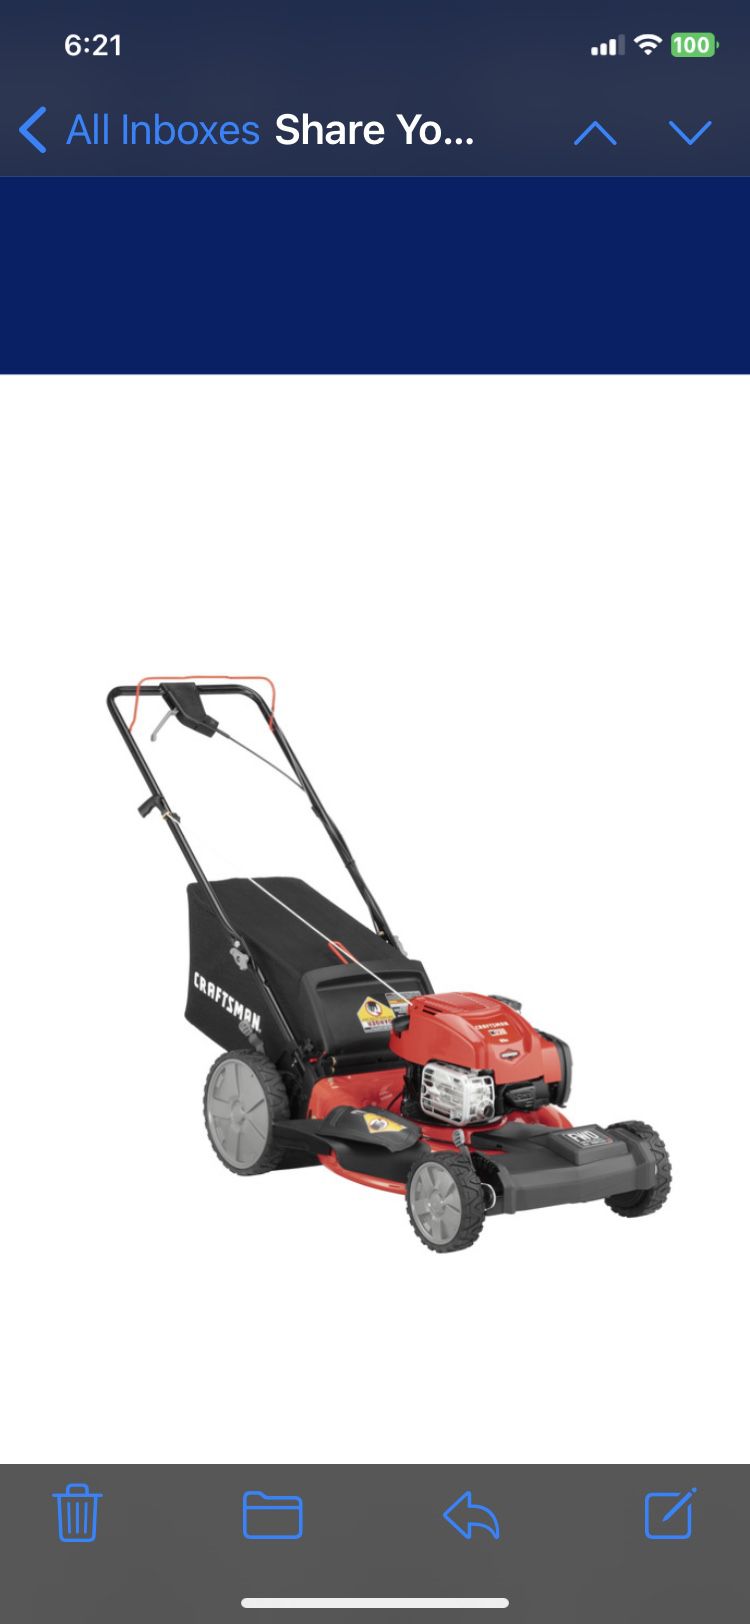 BRAND NEW! $225 CRAFTSMAN M230 163-cc 21-in Self-propelled Gas Lawn Mower with Briggs & Stratton Engine